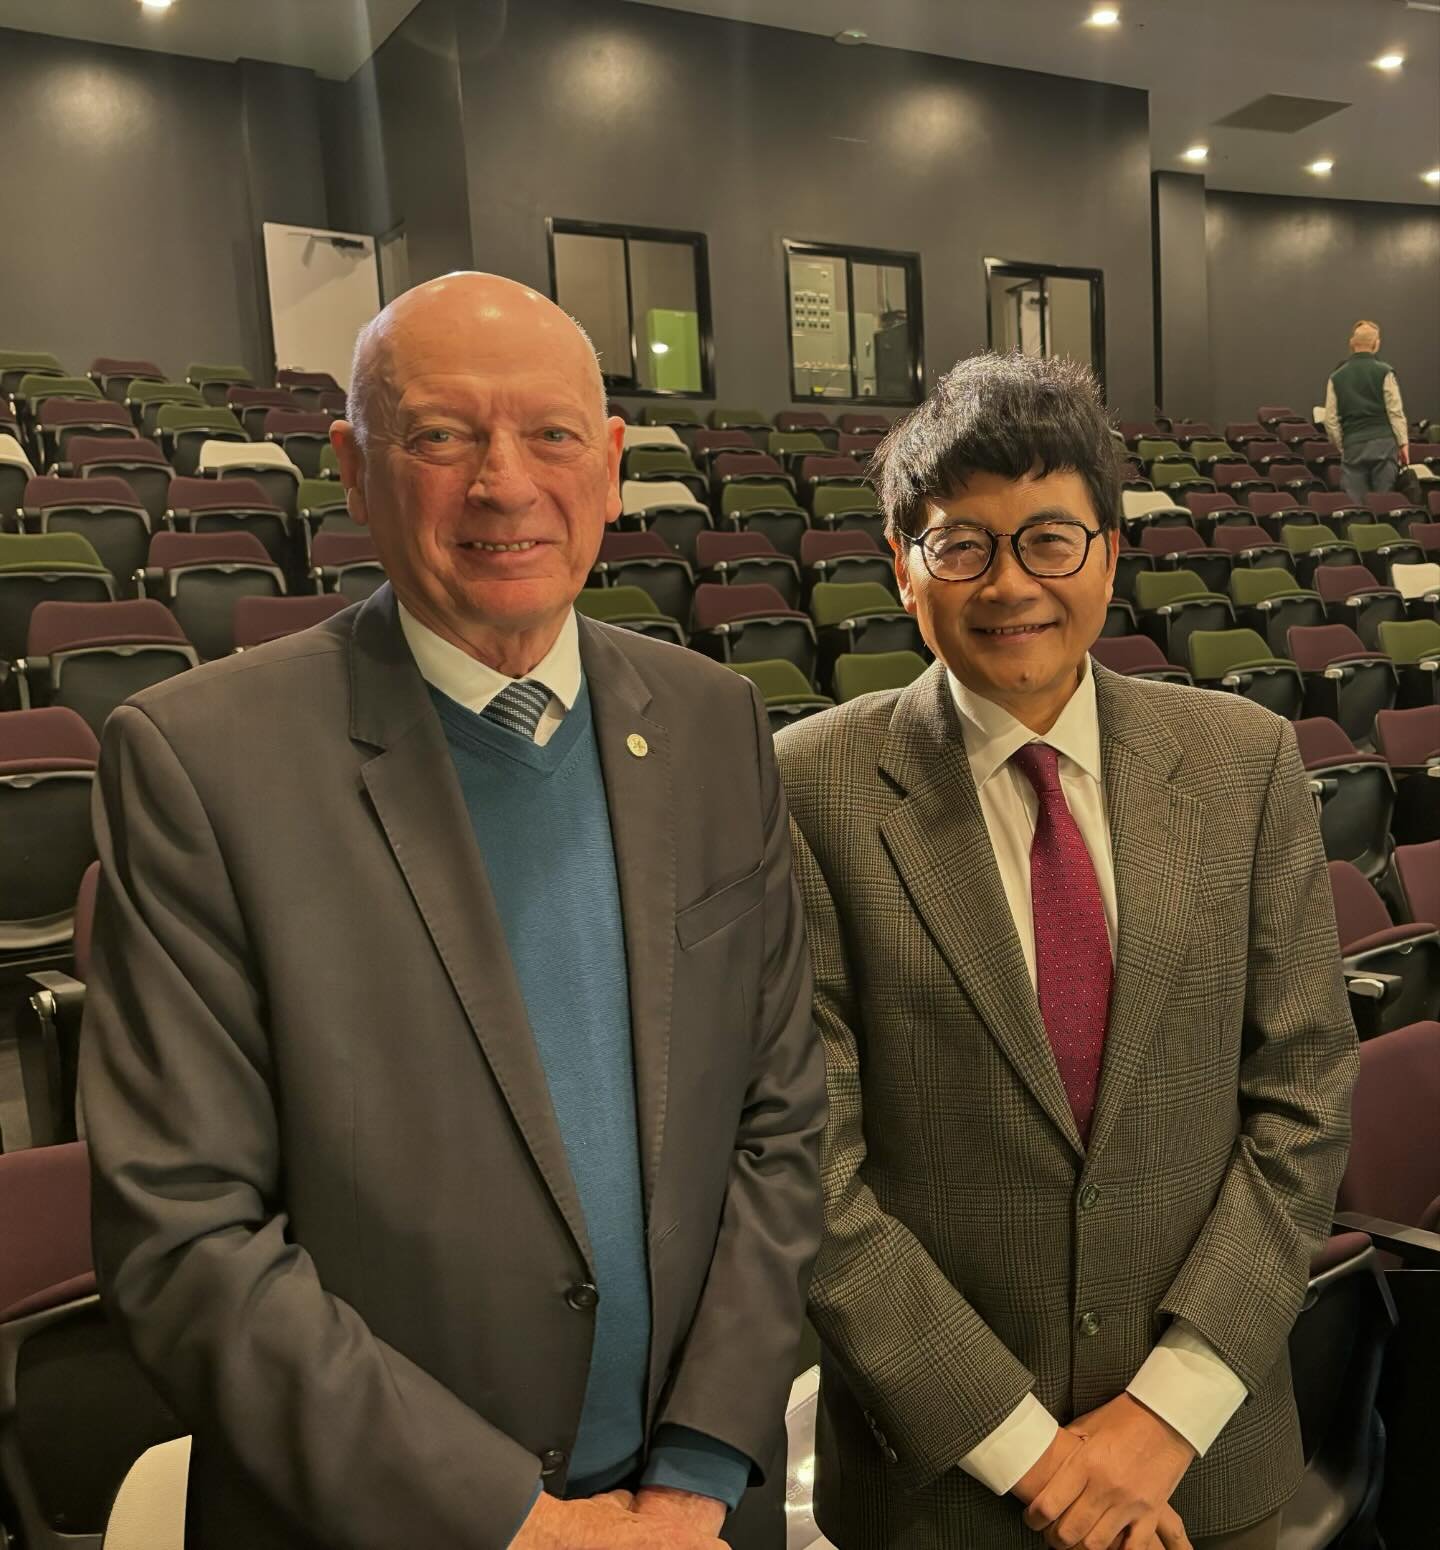 Good to meet, again, H.E. Dr Siswo Pramono, Indonesian Ambassador, at the Canberra Region Tourism Advisory Forum last Thursday at the National Convention Centre. H.E. spoke about increasing Indonesian tourist visitations to Australia, the newly annou